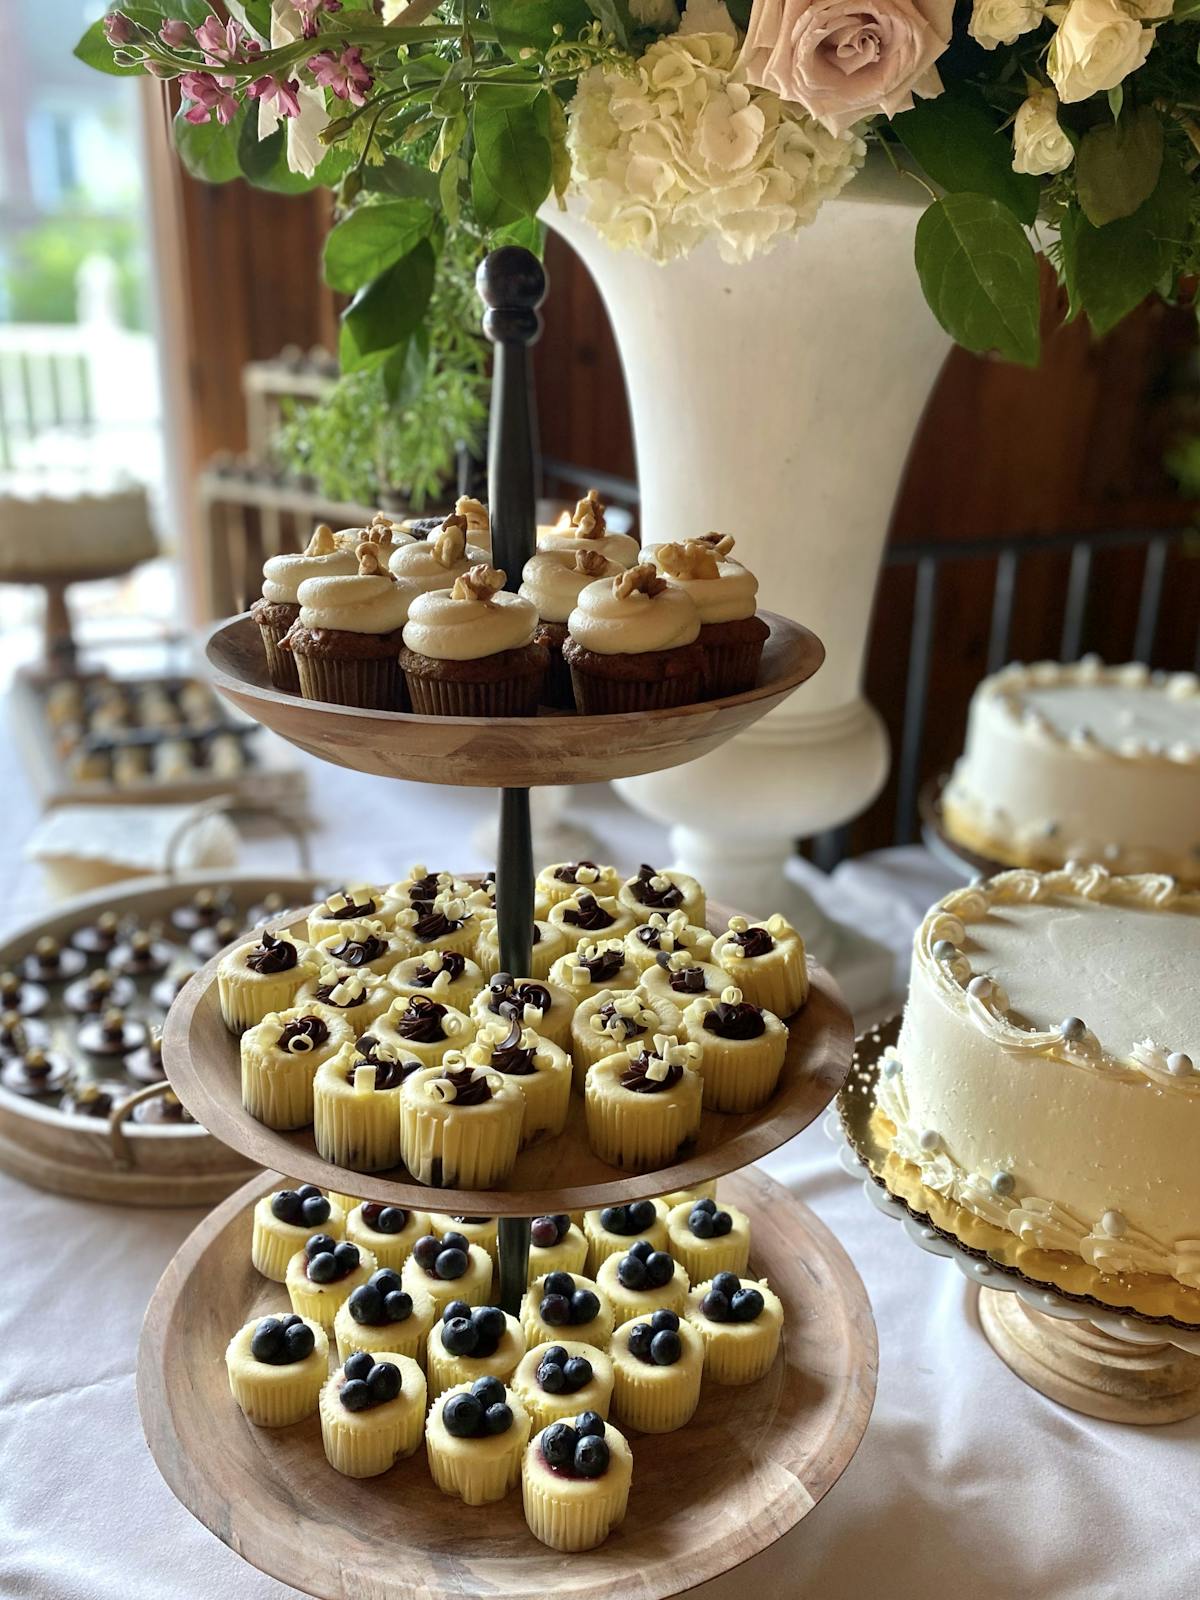 cupcakes and cheesecakes